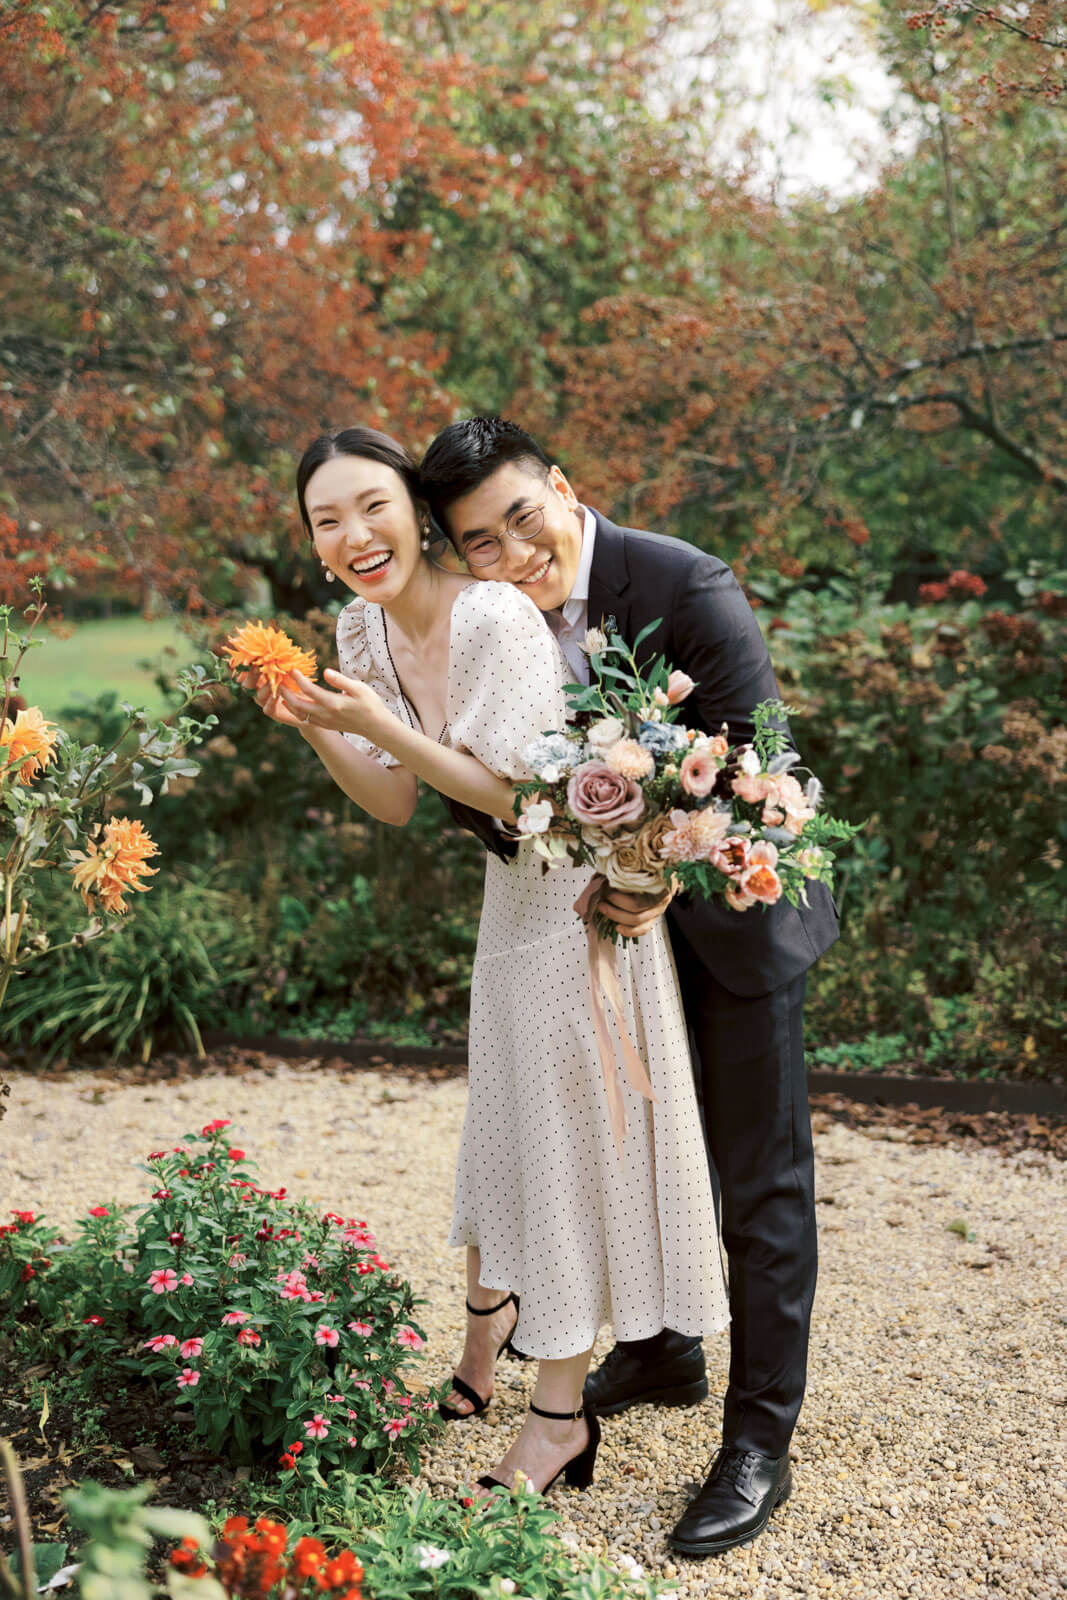 The engaged couple is happily holding beautiful flowers amidst the beautiful fall foliage. Image by Jenny Fu Studio.